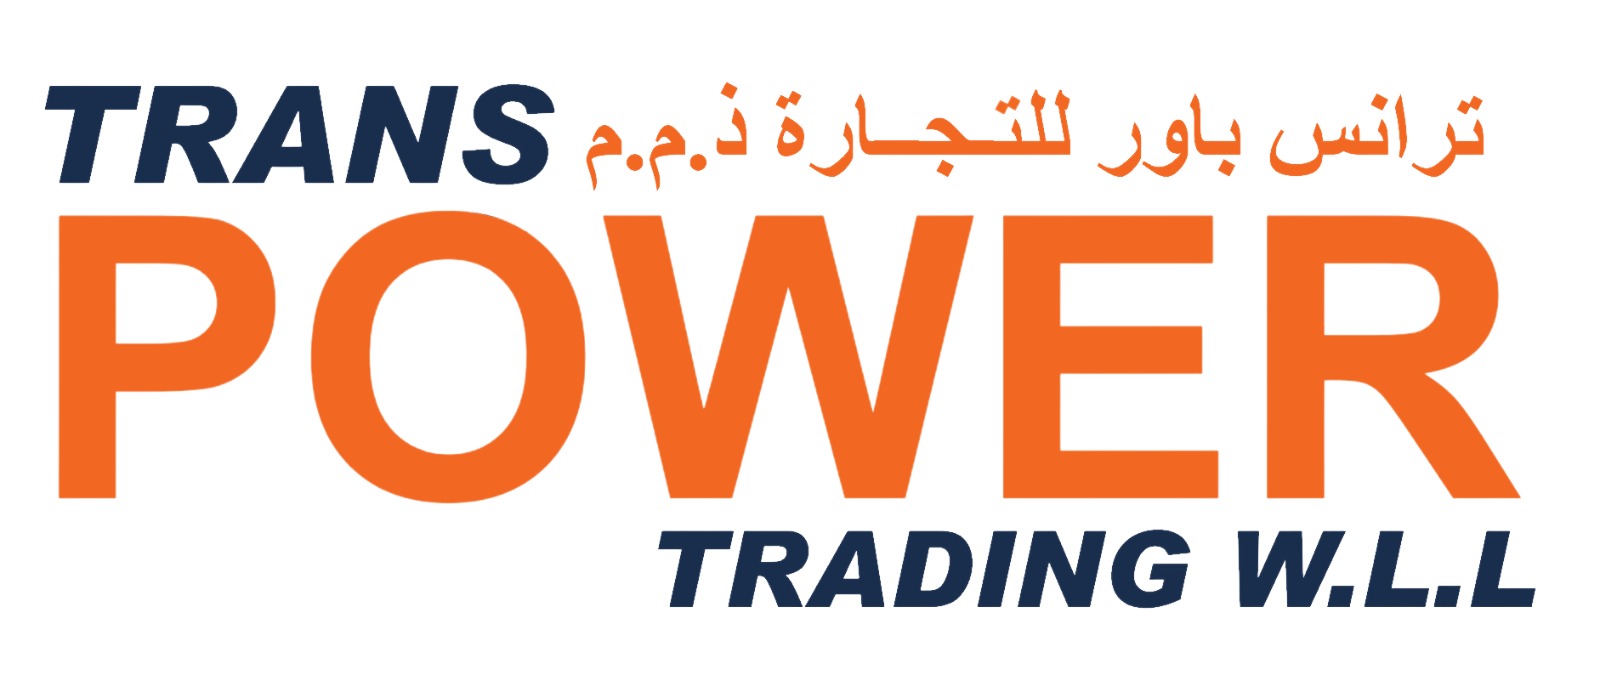 Transpower trading